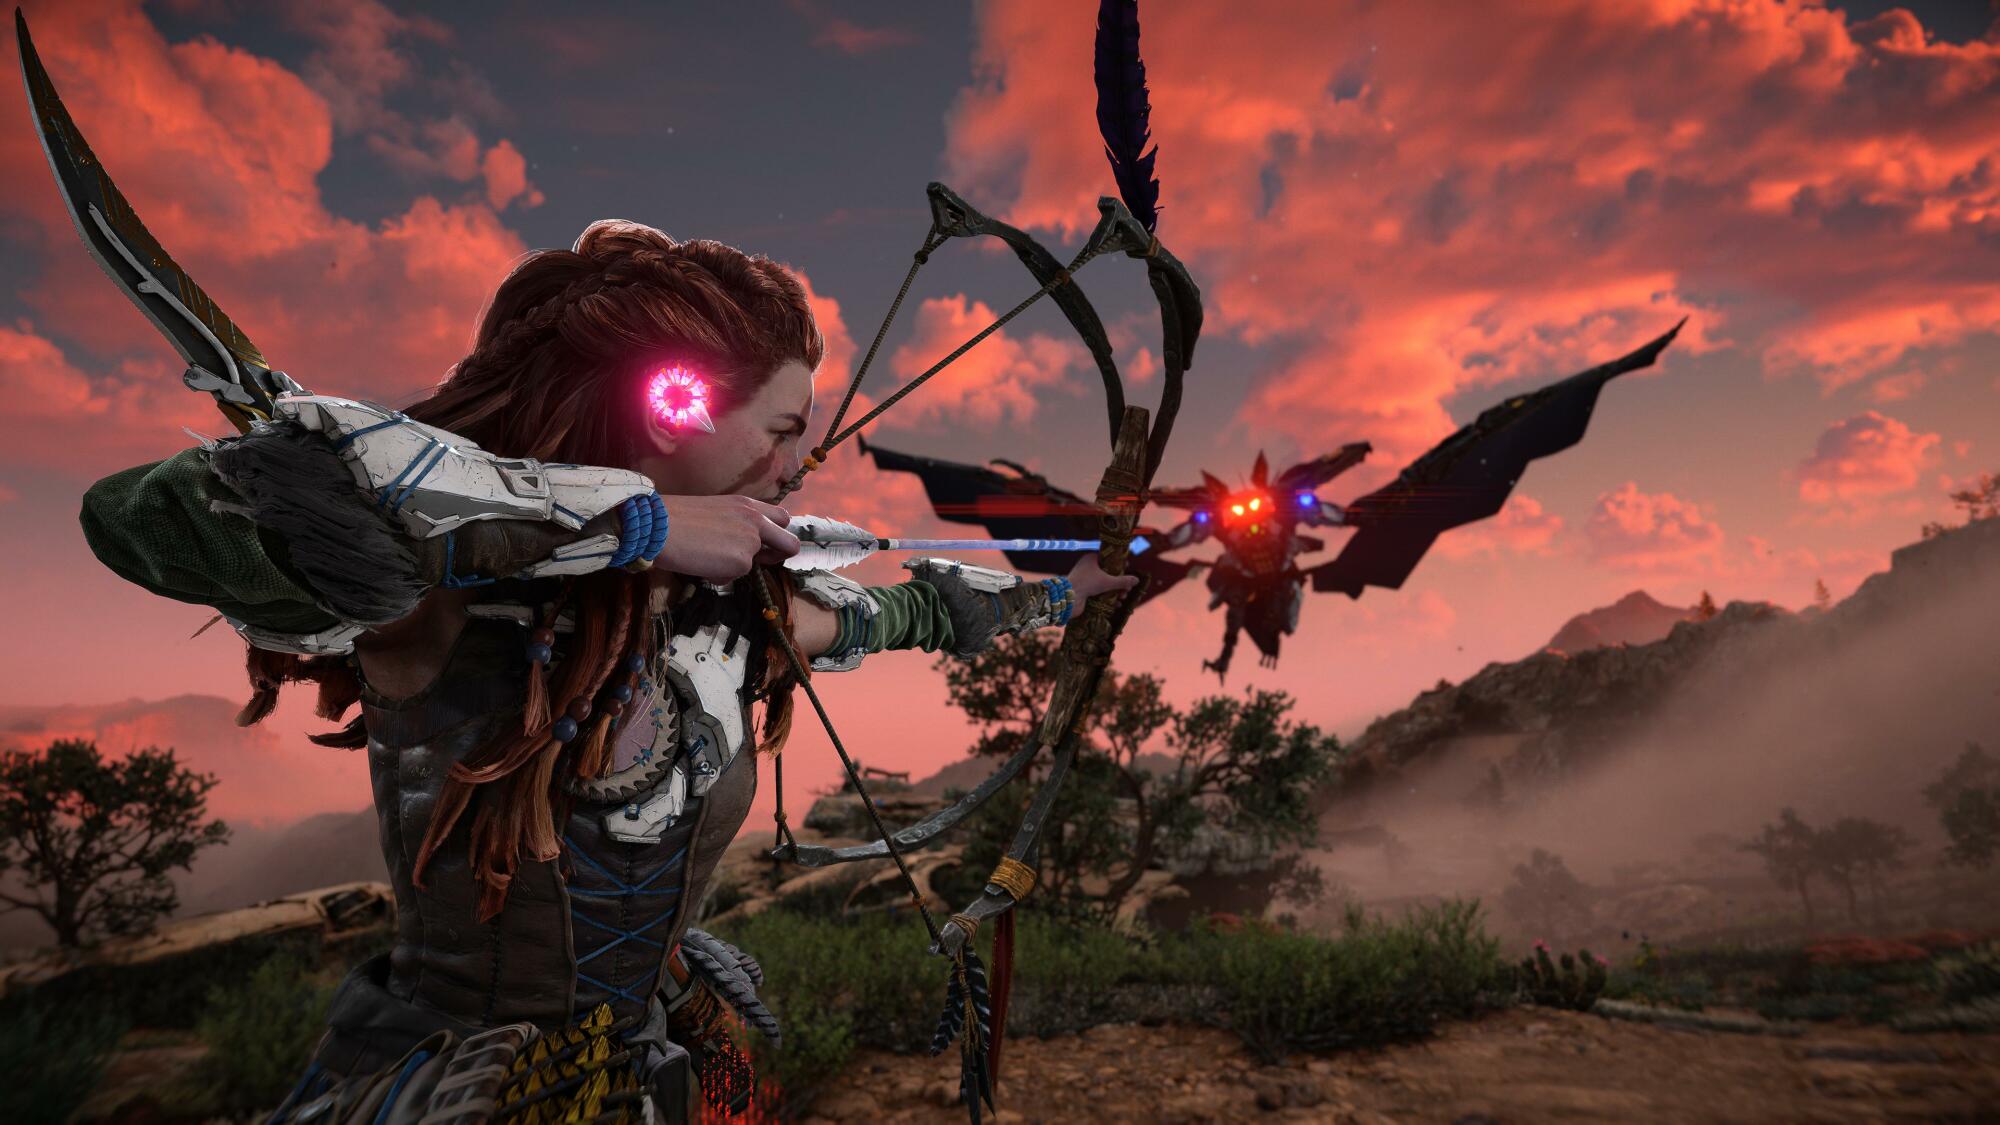 A screenshot from "Horizon Forbidden West." Aloy aims a shot at a large, flying robot that looks like a giant-sized bat.